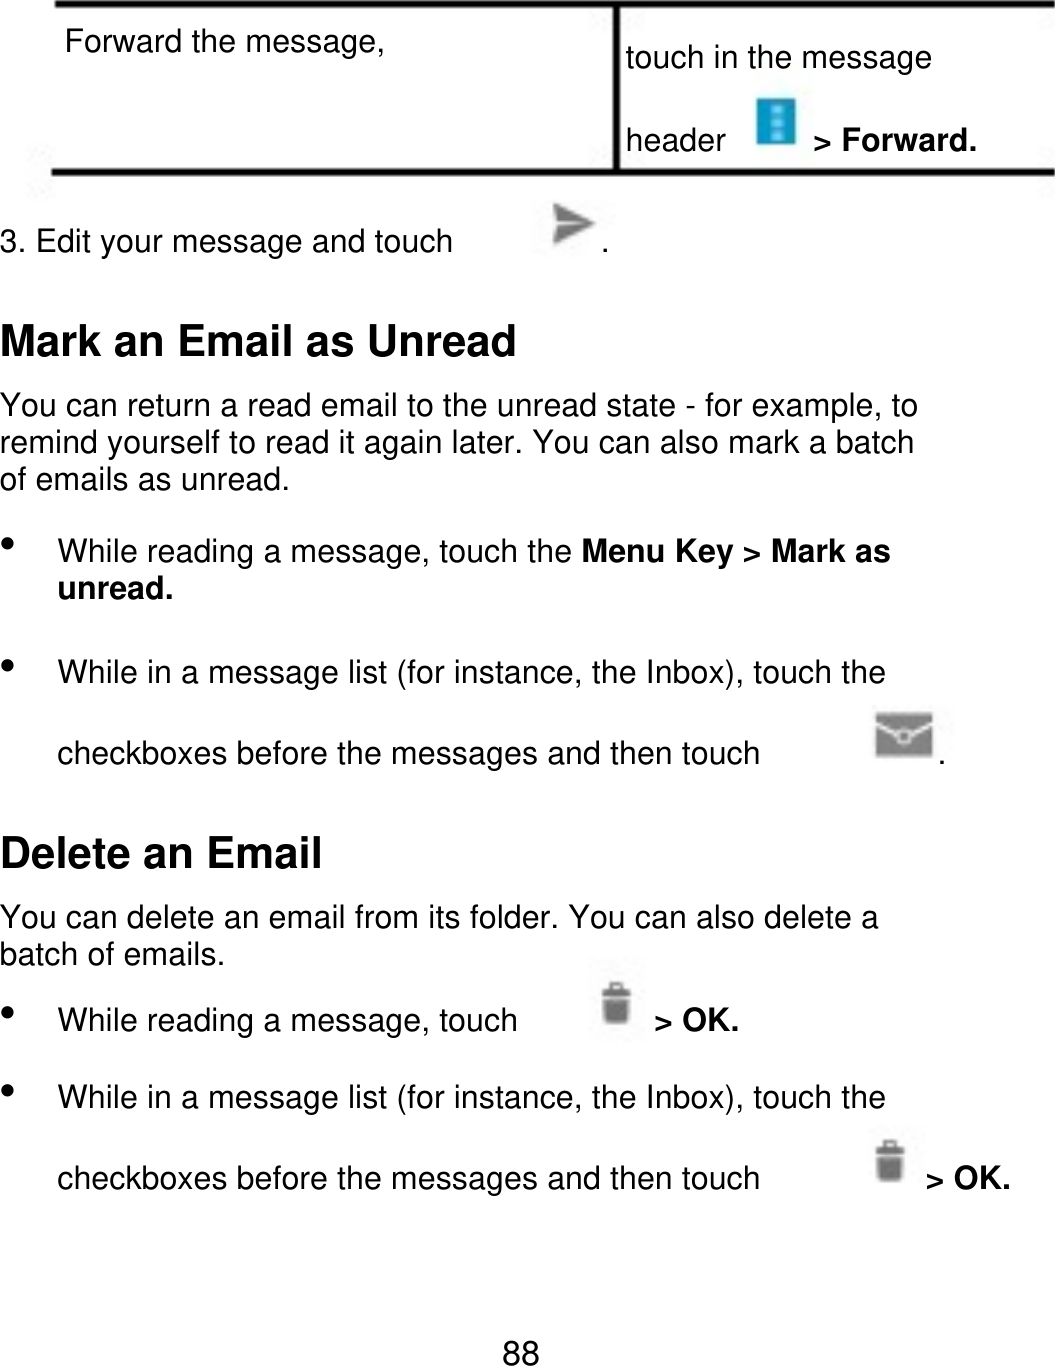 Forward the message, touch in the message header &gt; Forward. 3. Edit your message and touch . Mark an Email as Unread You can return a read email to the unread state - for example, to remind yourself to read it again later. You can also mark a batch of emails as unread.   While reading a message, touch the Menu Key &gt; Mark as unread. While in a message list (for instance, the Inbox), touch the checkboxes before the messages and then touch . Delete an Email You can delete an email from its folder. You can also delete a batch of emails.   While reading a message, touch &gt; OK. While in a message list (for instance, the Inbox), touch the checkboxes before the messages and then touch &gt; OK. 88 